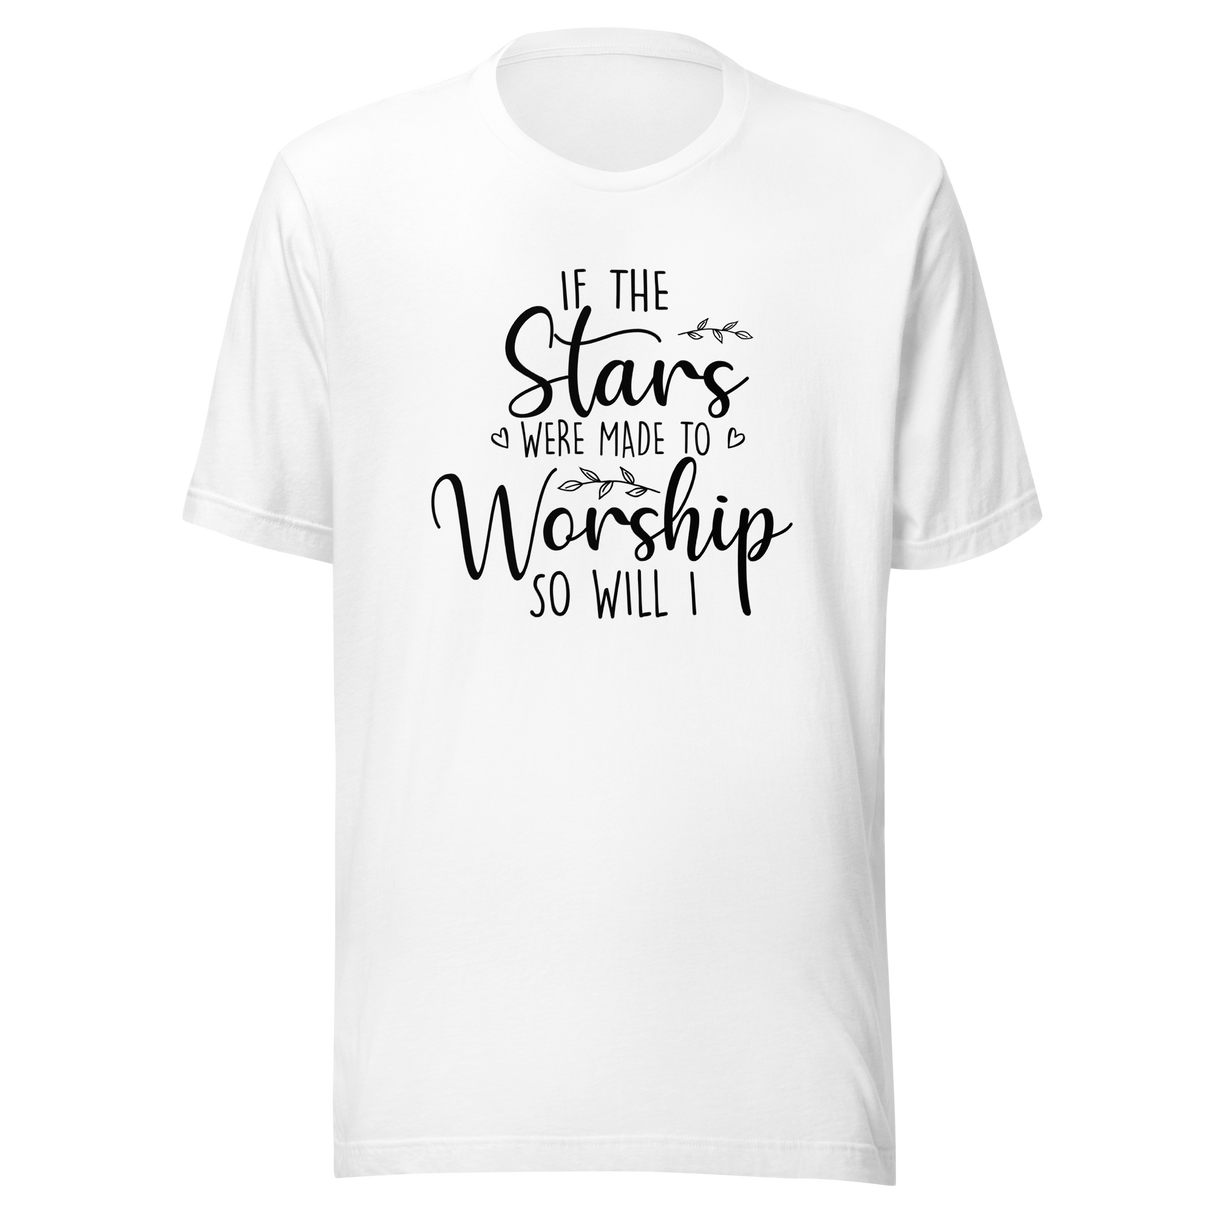 If The Stars Were Made To Worship So Will I - Faith Tee - Worship T-Shirt - Faith Tee - Stars T-Shirt - Devotion Tee